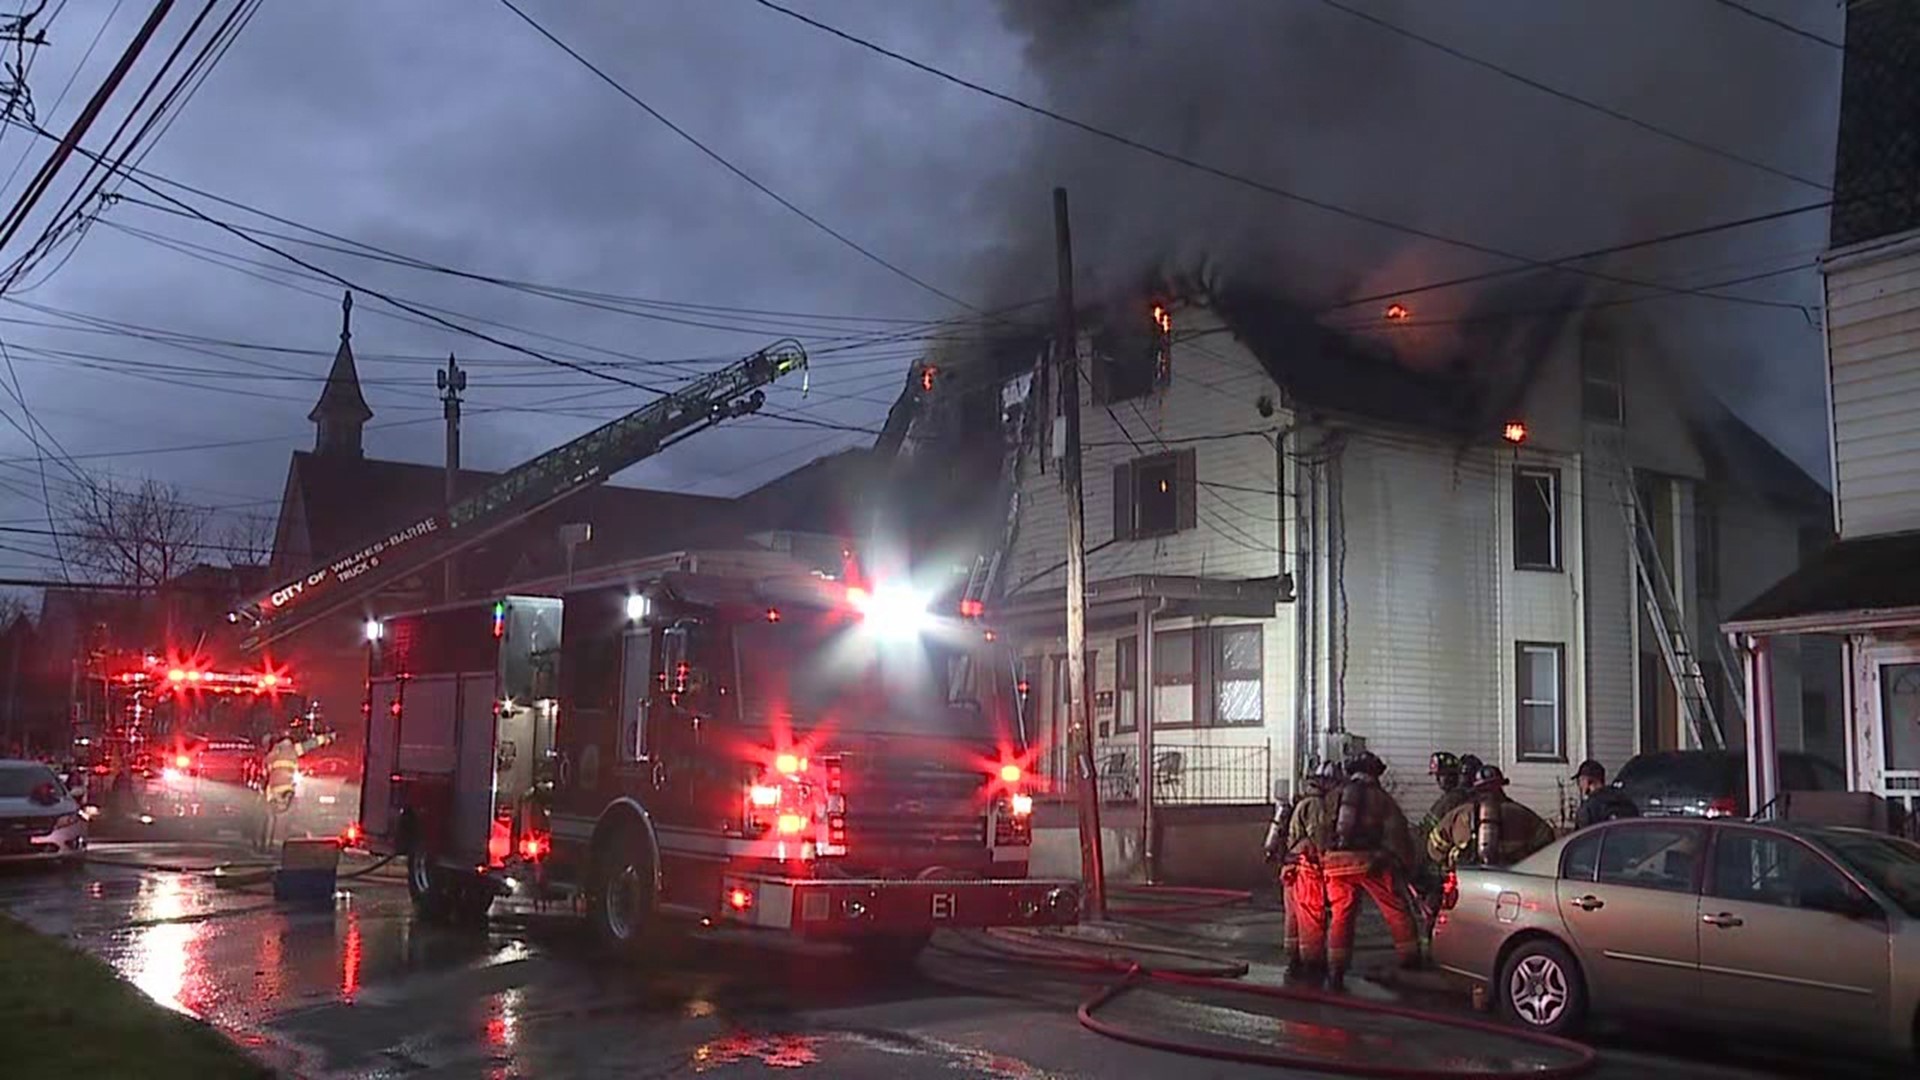 Flames ripped through an apartment building in Wilkes-Barre around 6:30 p.m. Sunday night.